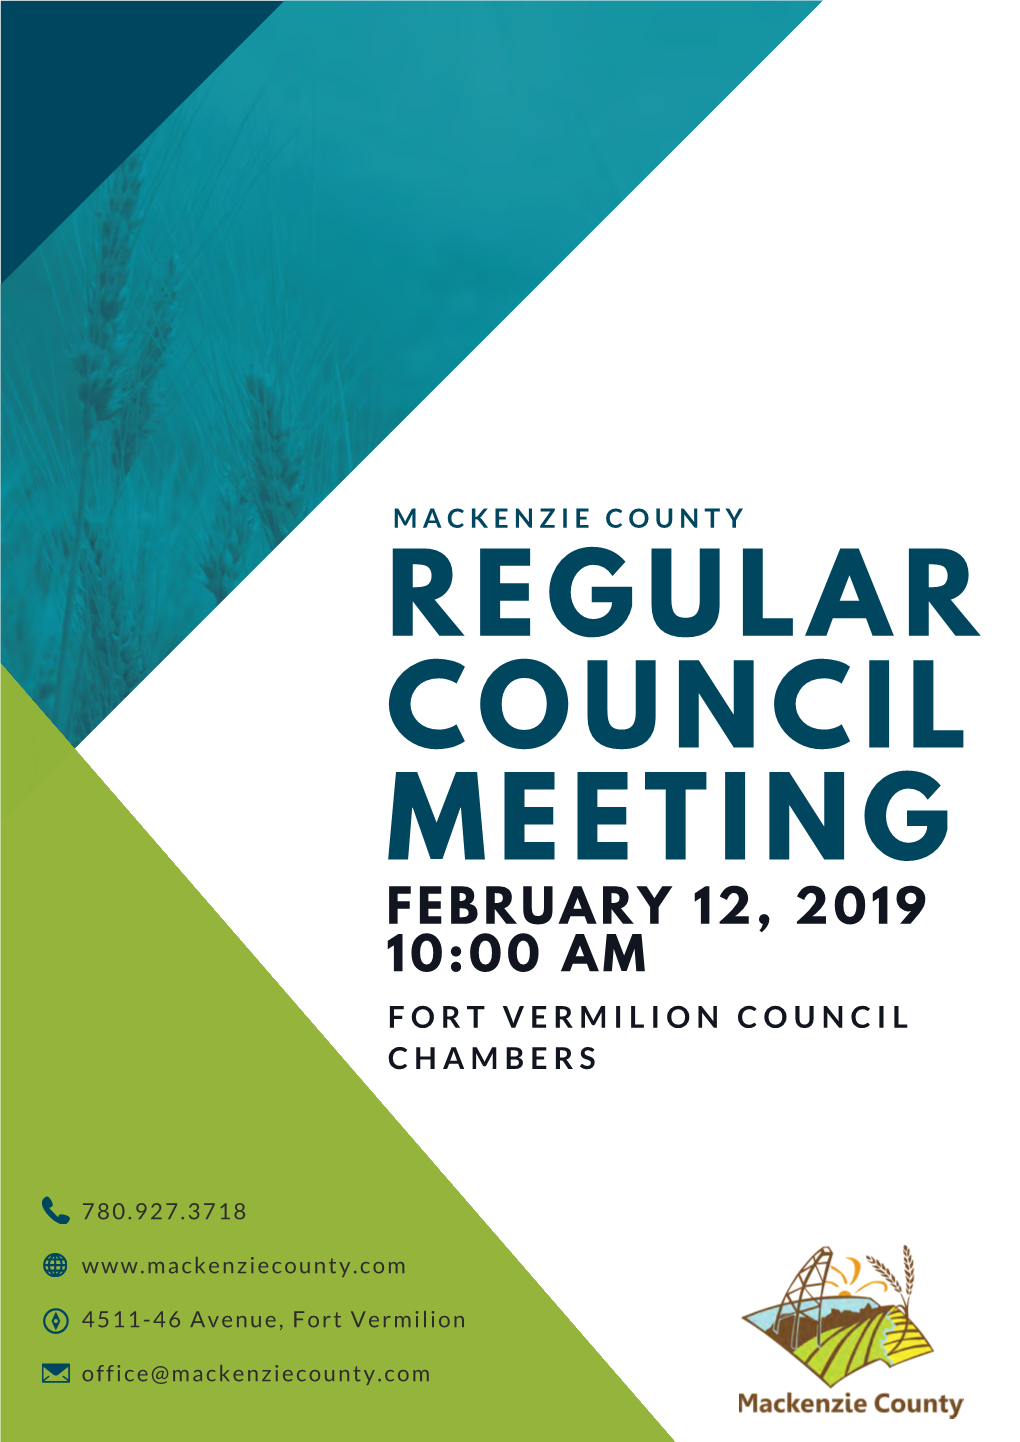 Regular Council Meeting February 12, 2019 10:00 Am Fort Vermilion Council Chambers